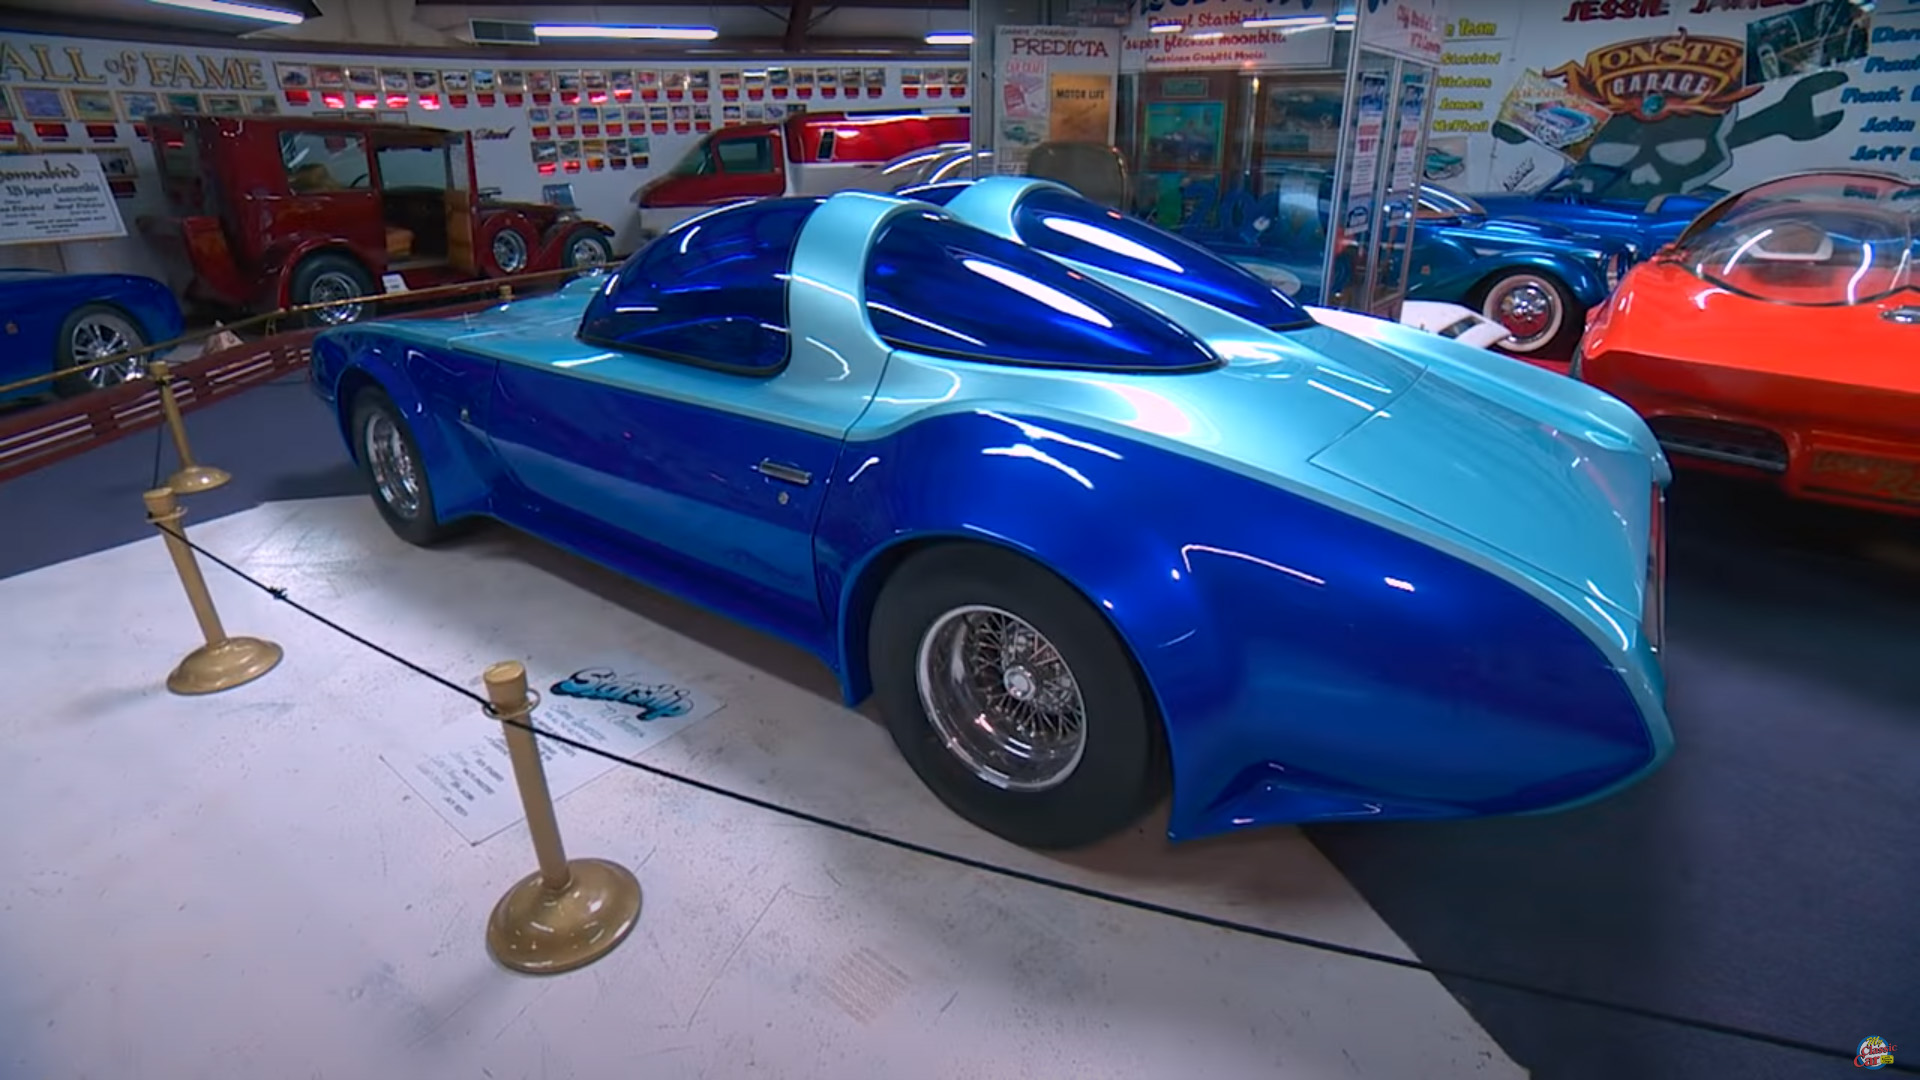 Season 24 2020 Episode 26 My Classic Car With Dennis Gage